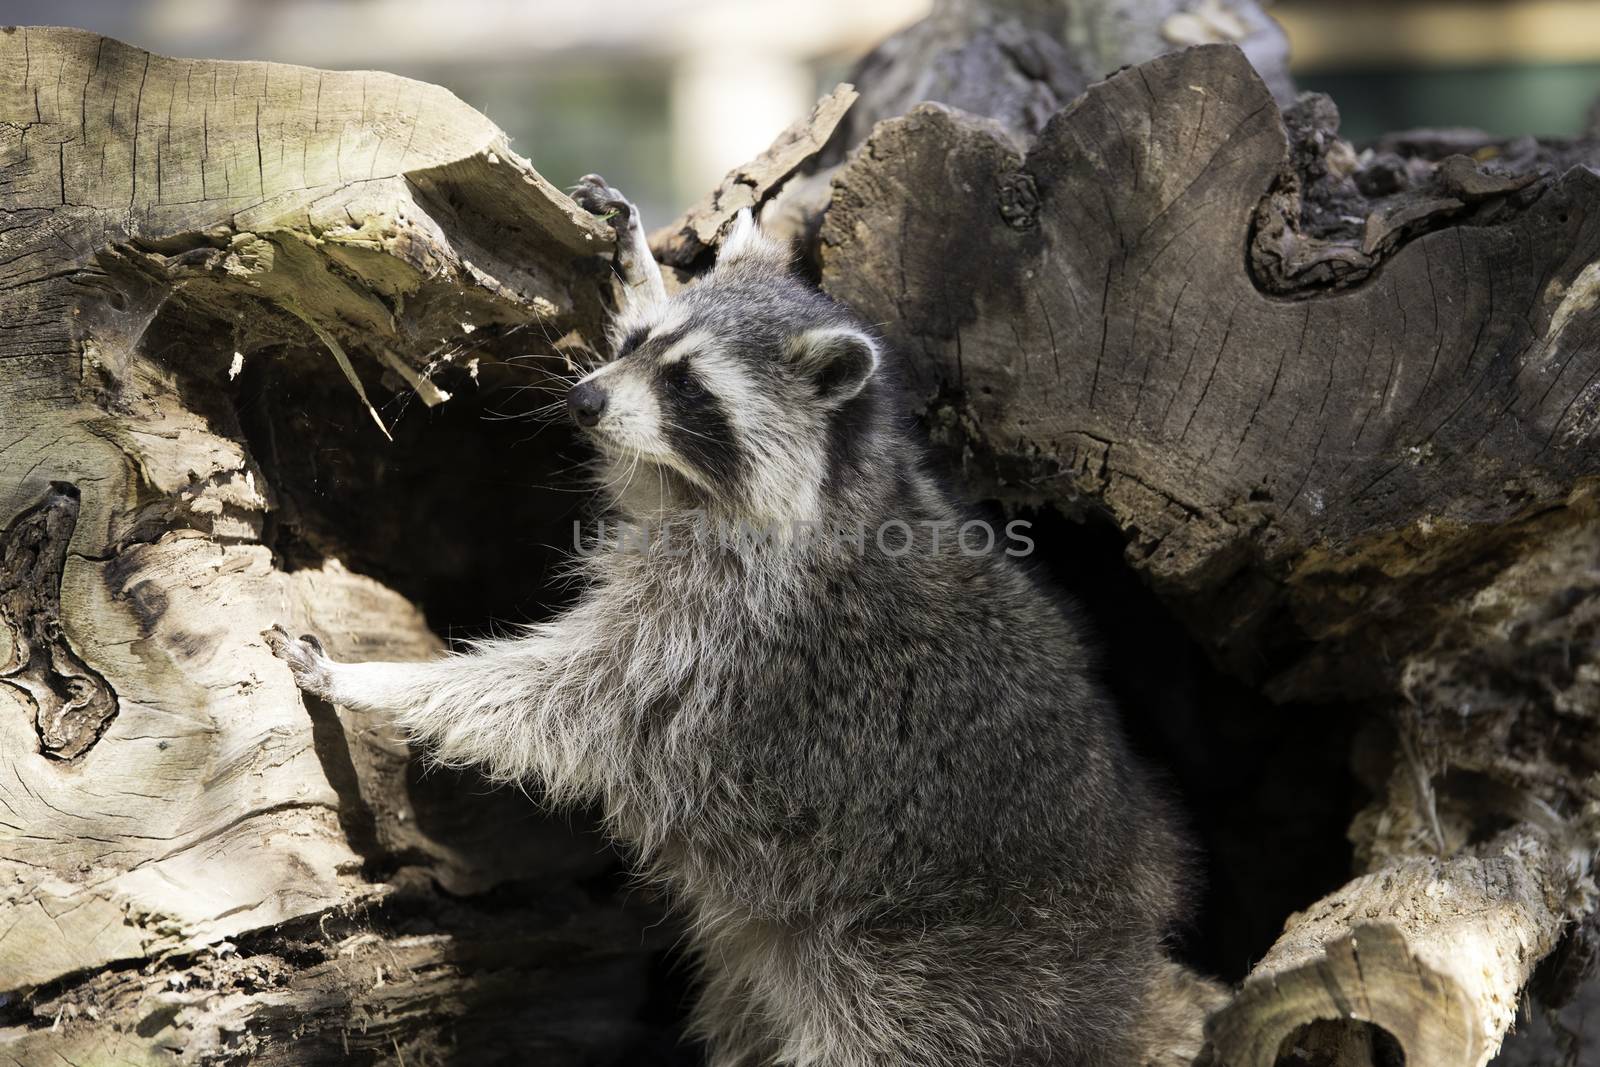 Raccoon climbing out hollow tree trunk by avanheertum